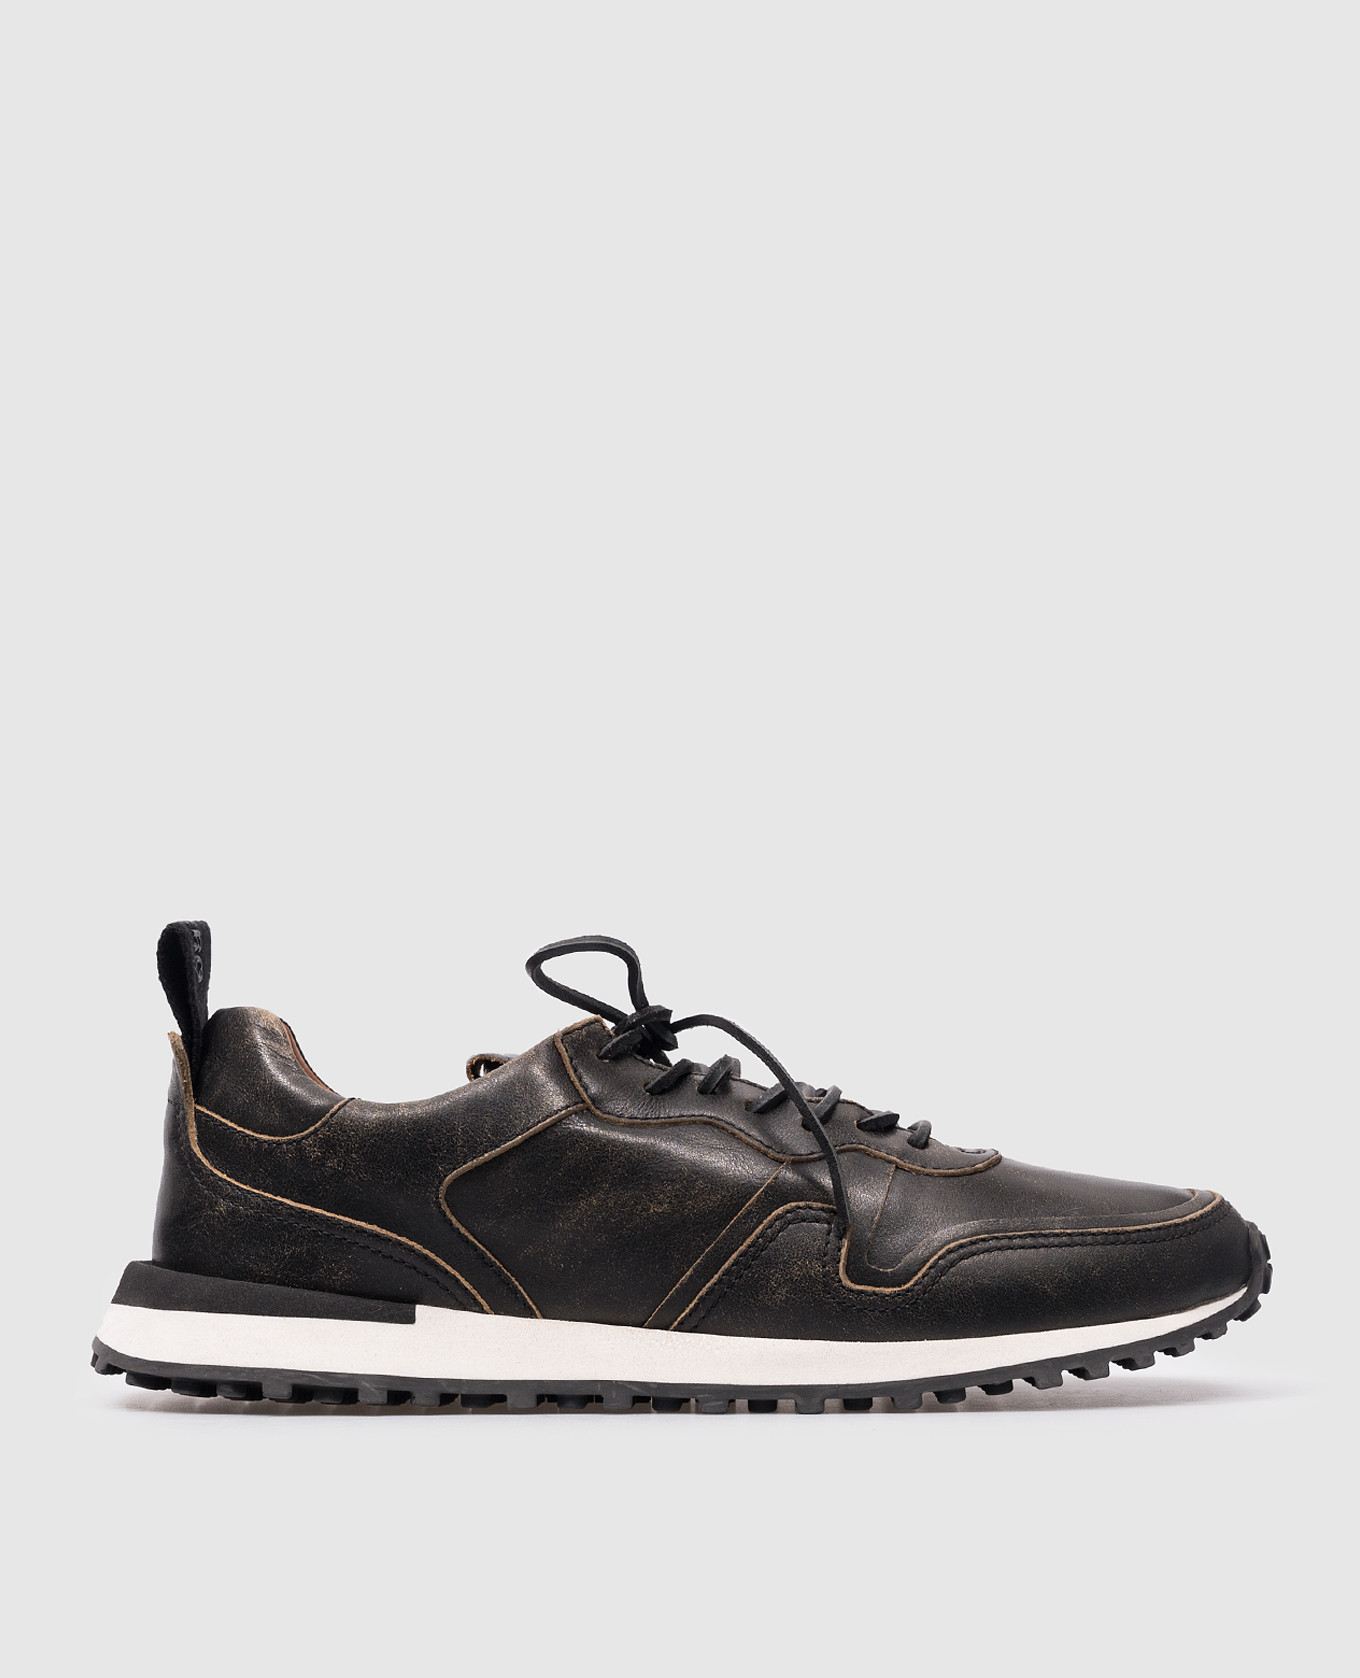 Black leather Futura sneakers with a vintage effect